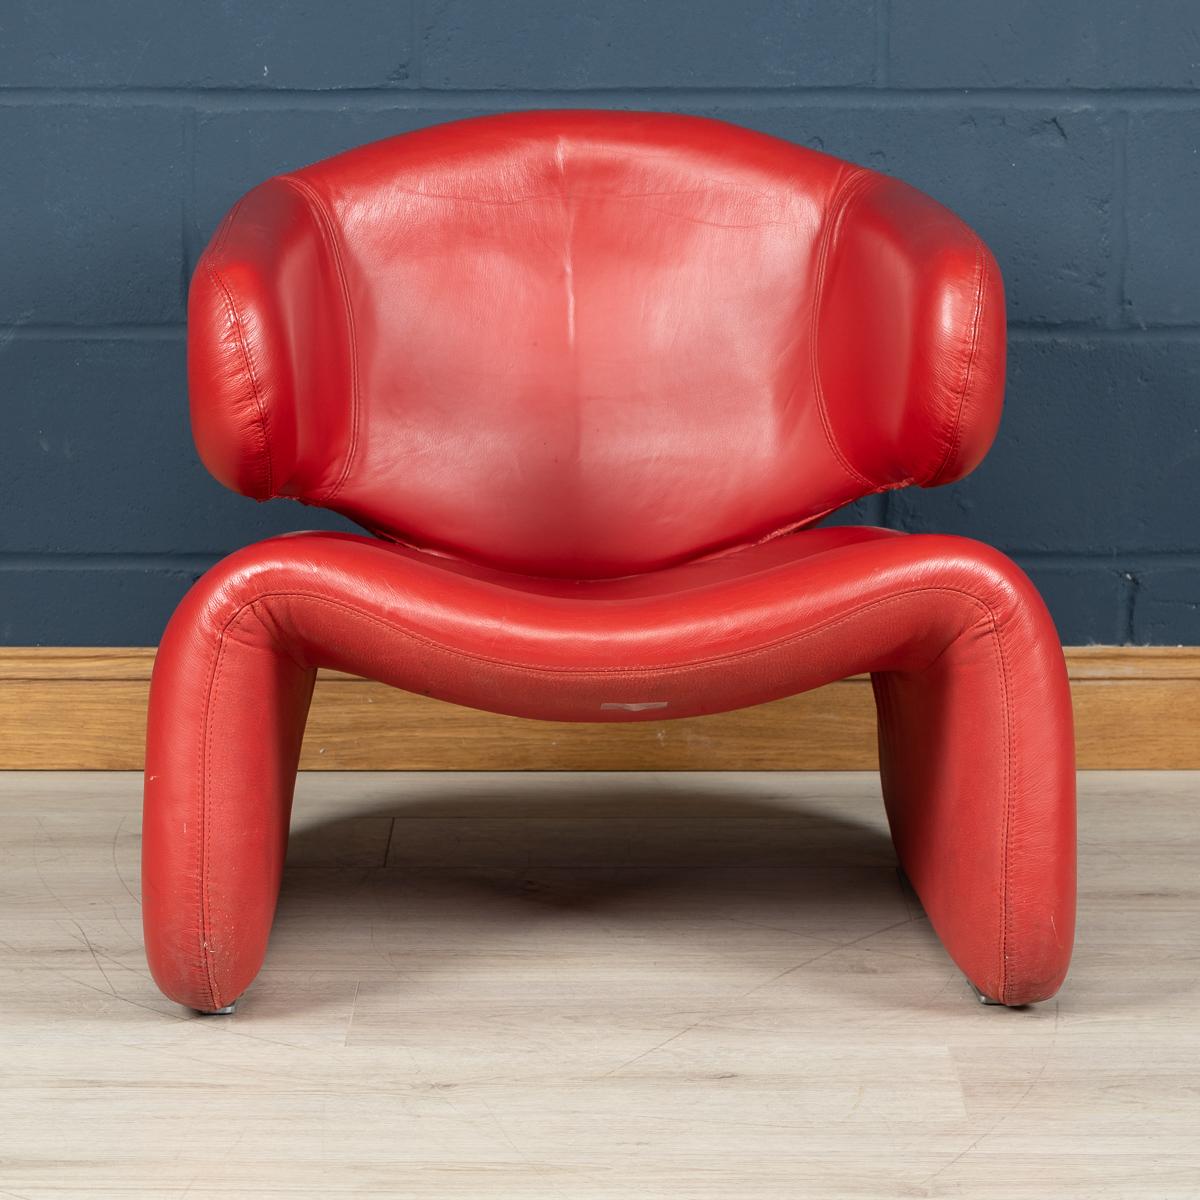 The Djinn chair is an important design of the Modernist style, created by French designer Olivier Mourgue. Originally called the 